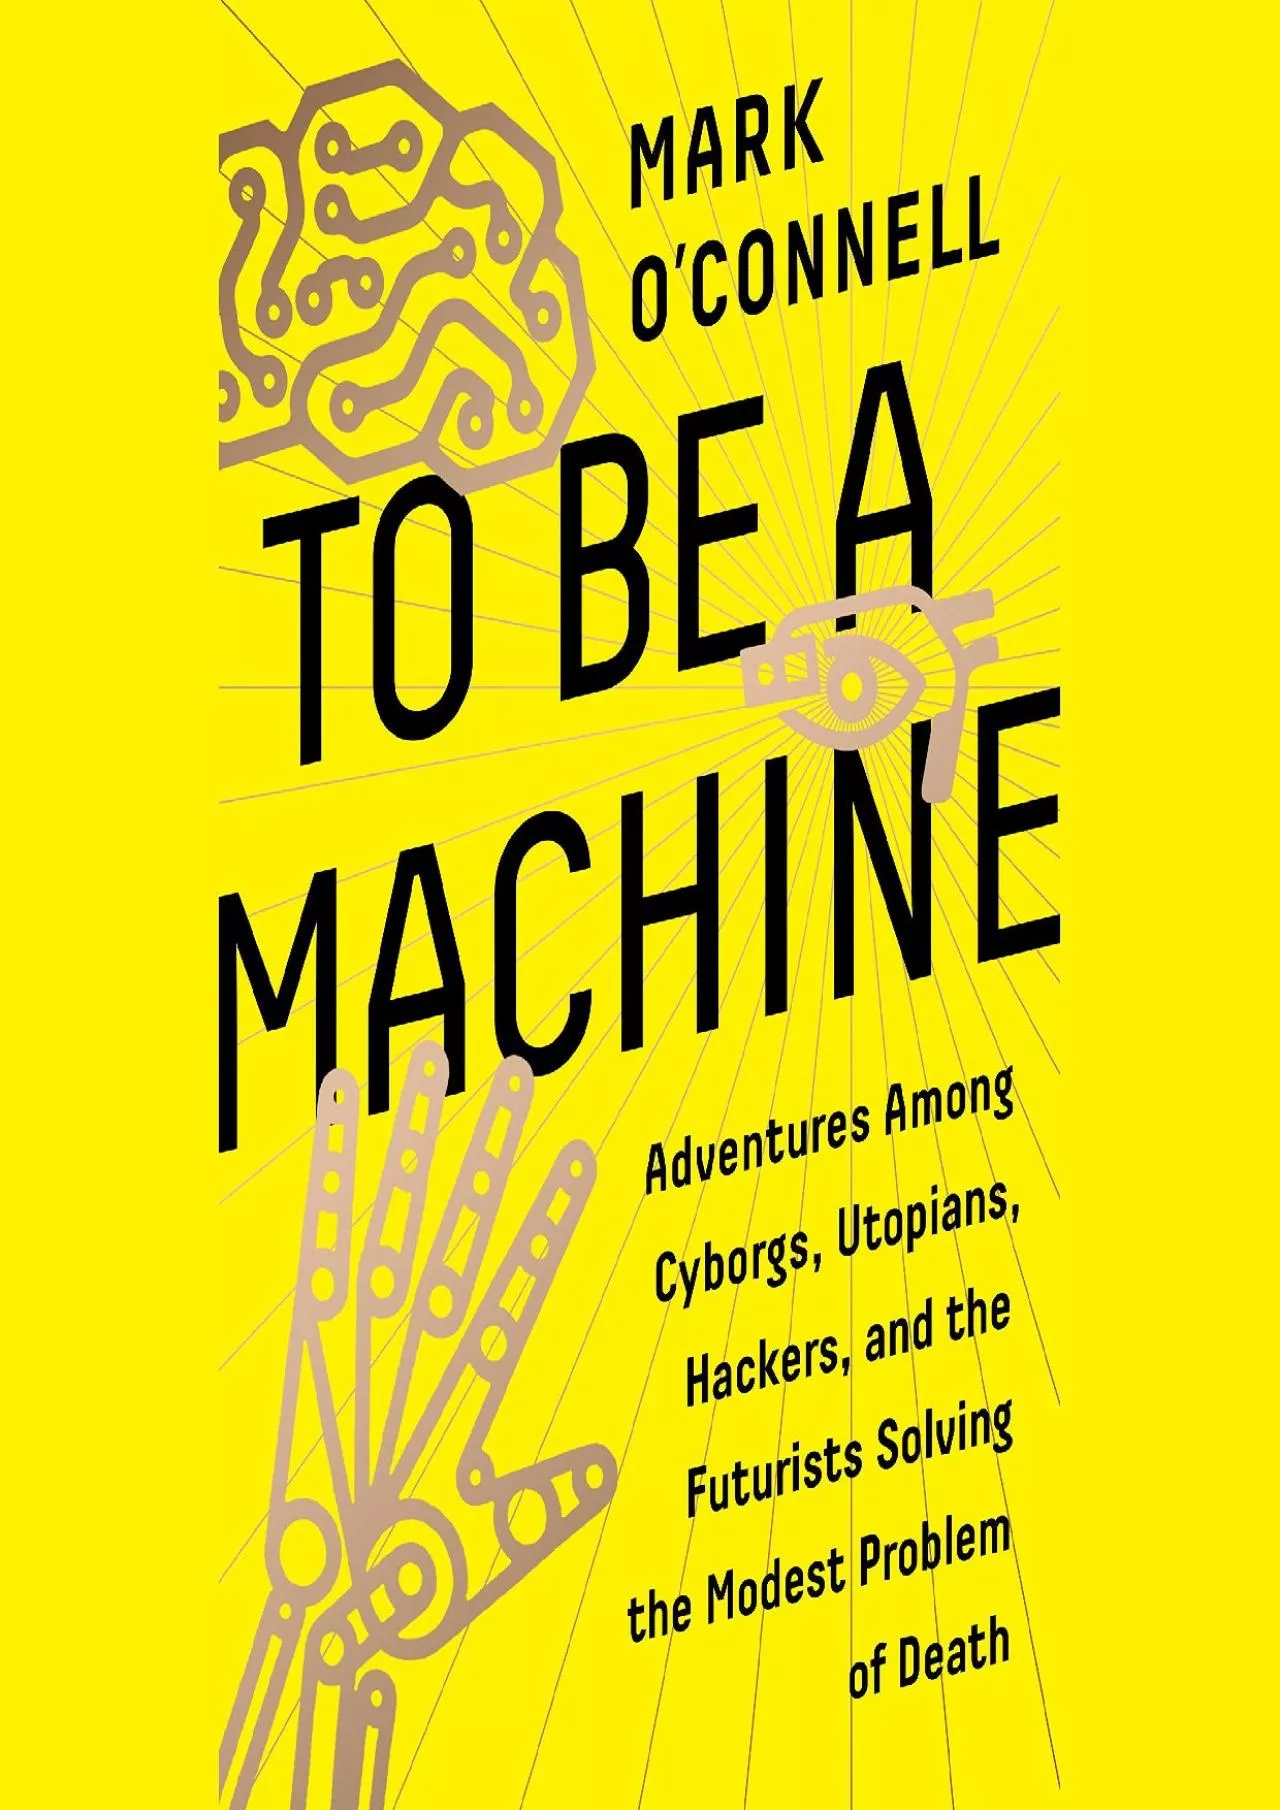 (BOOK)-To Be a Machine: Adventures Among Cyborgs, Utopians, Hackers, and the Futurists